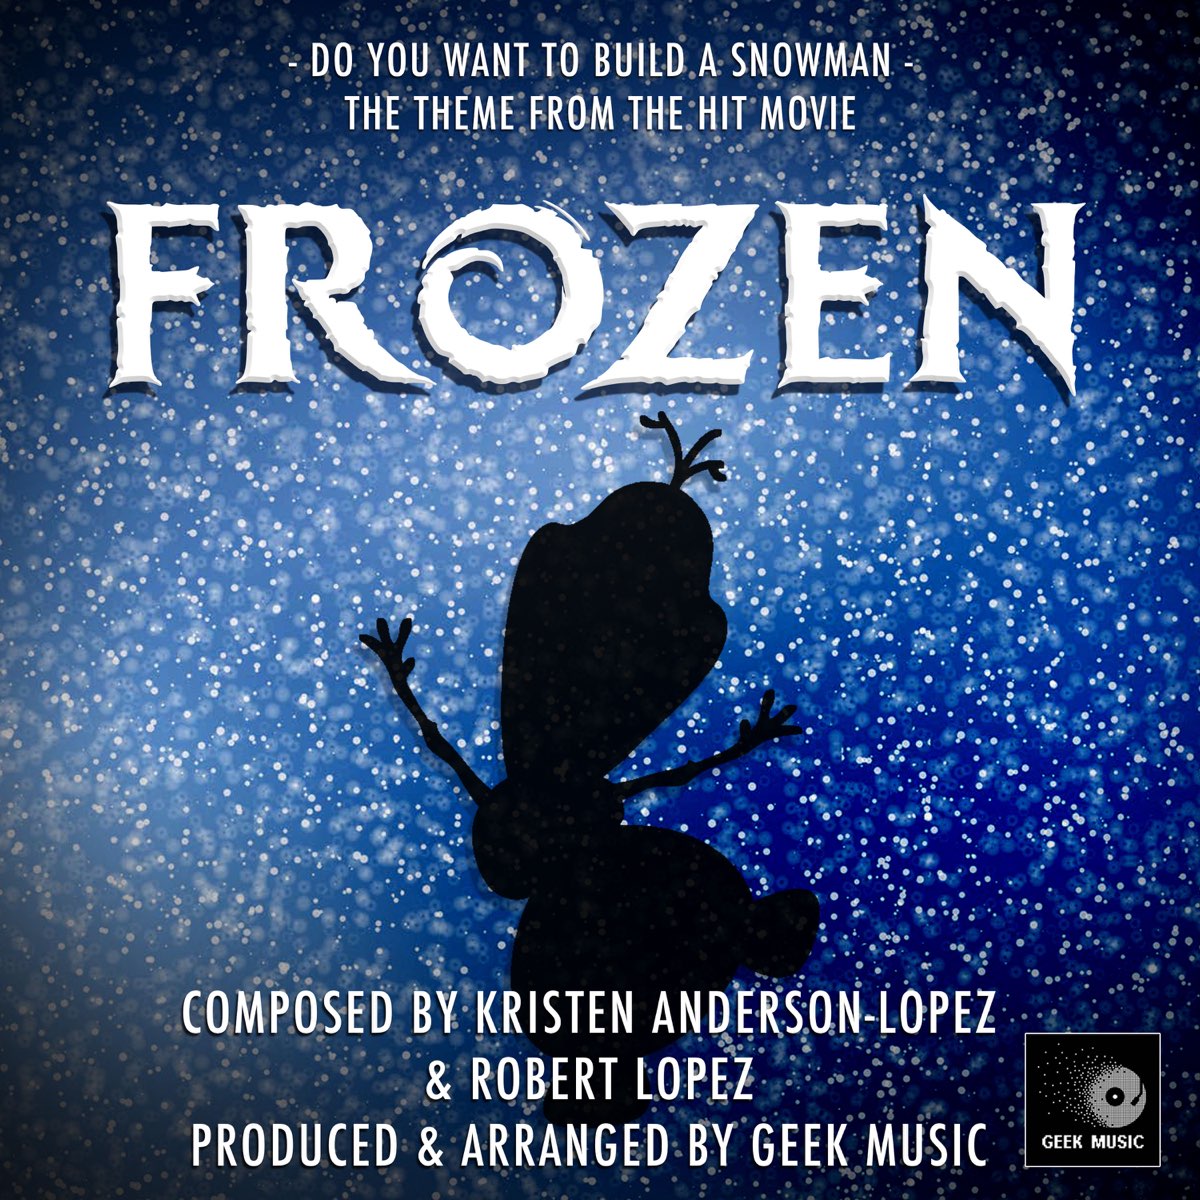 Do You Want to Build a Snowman? - From Frozen/Soundtrack Version